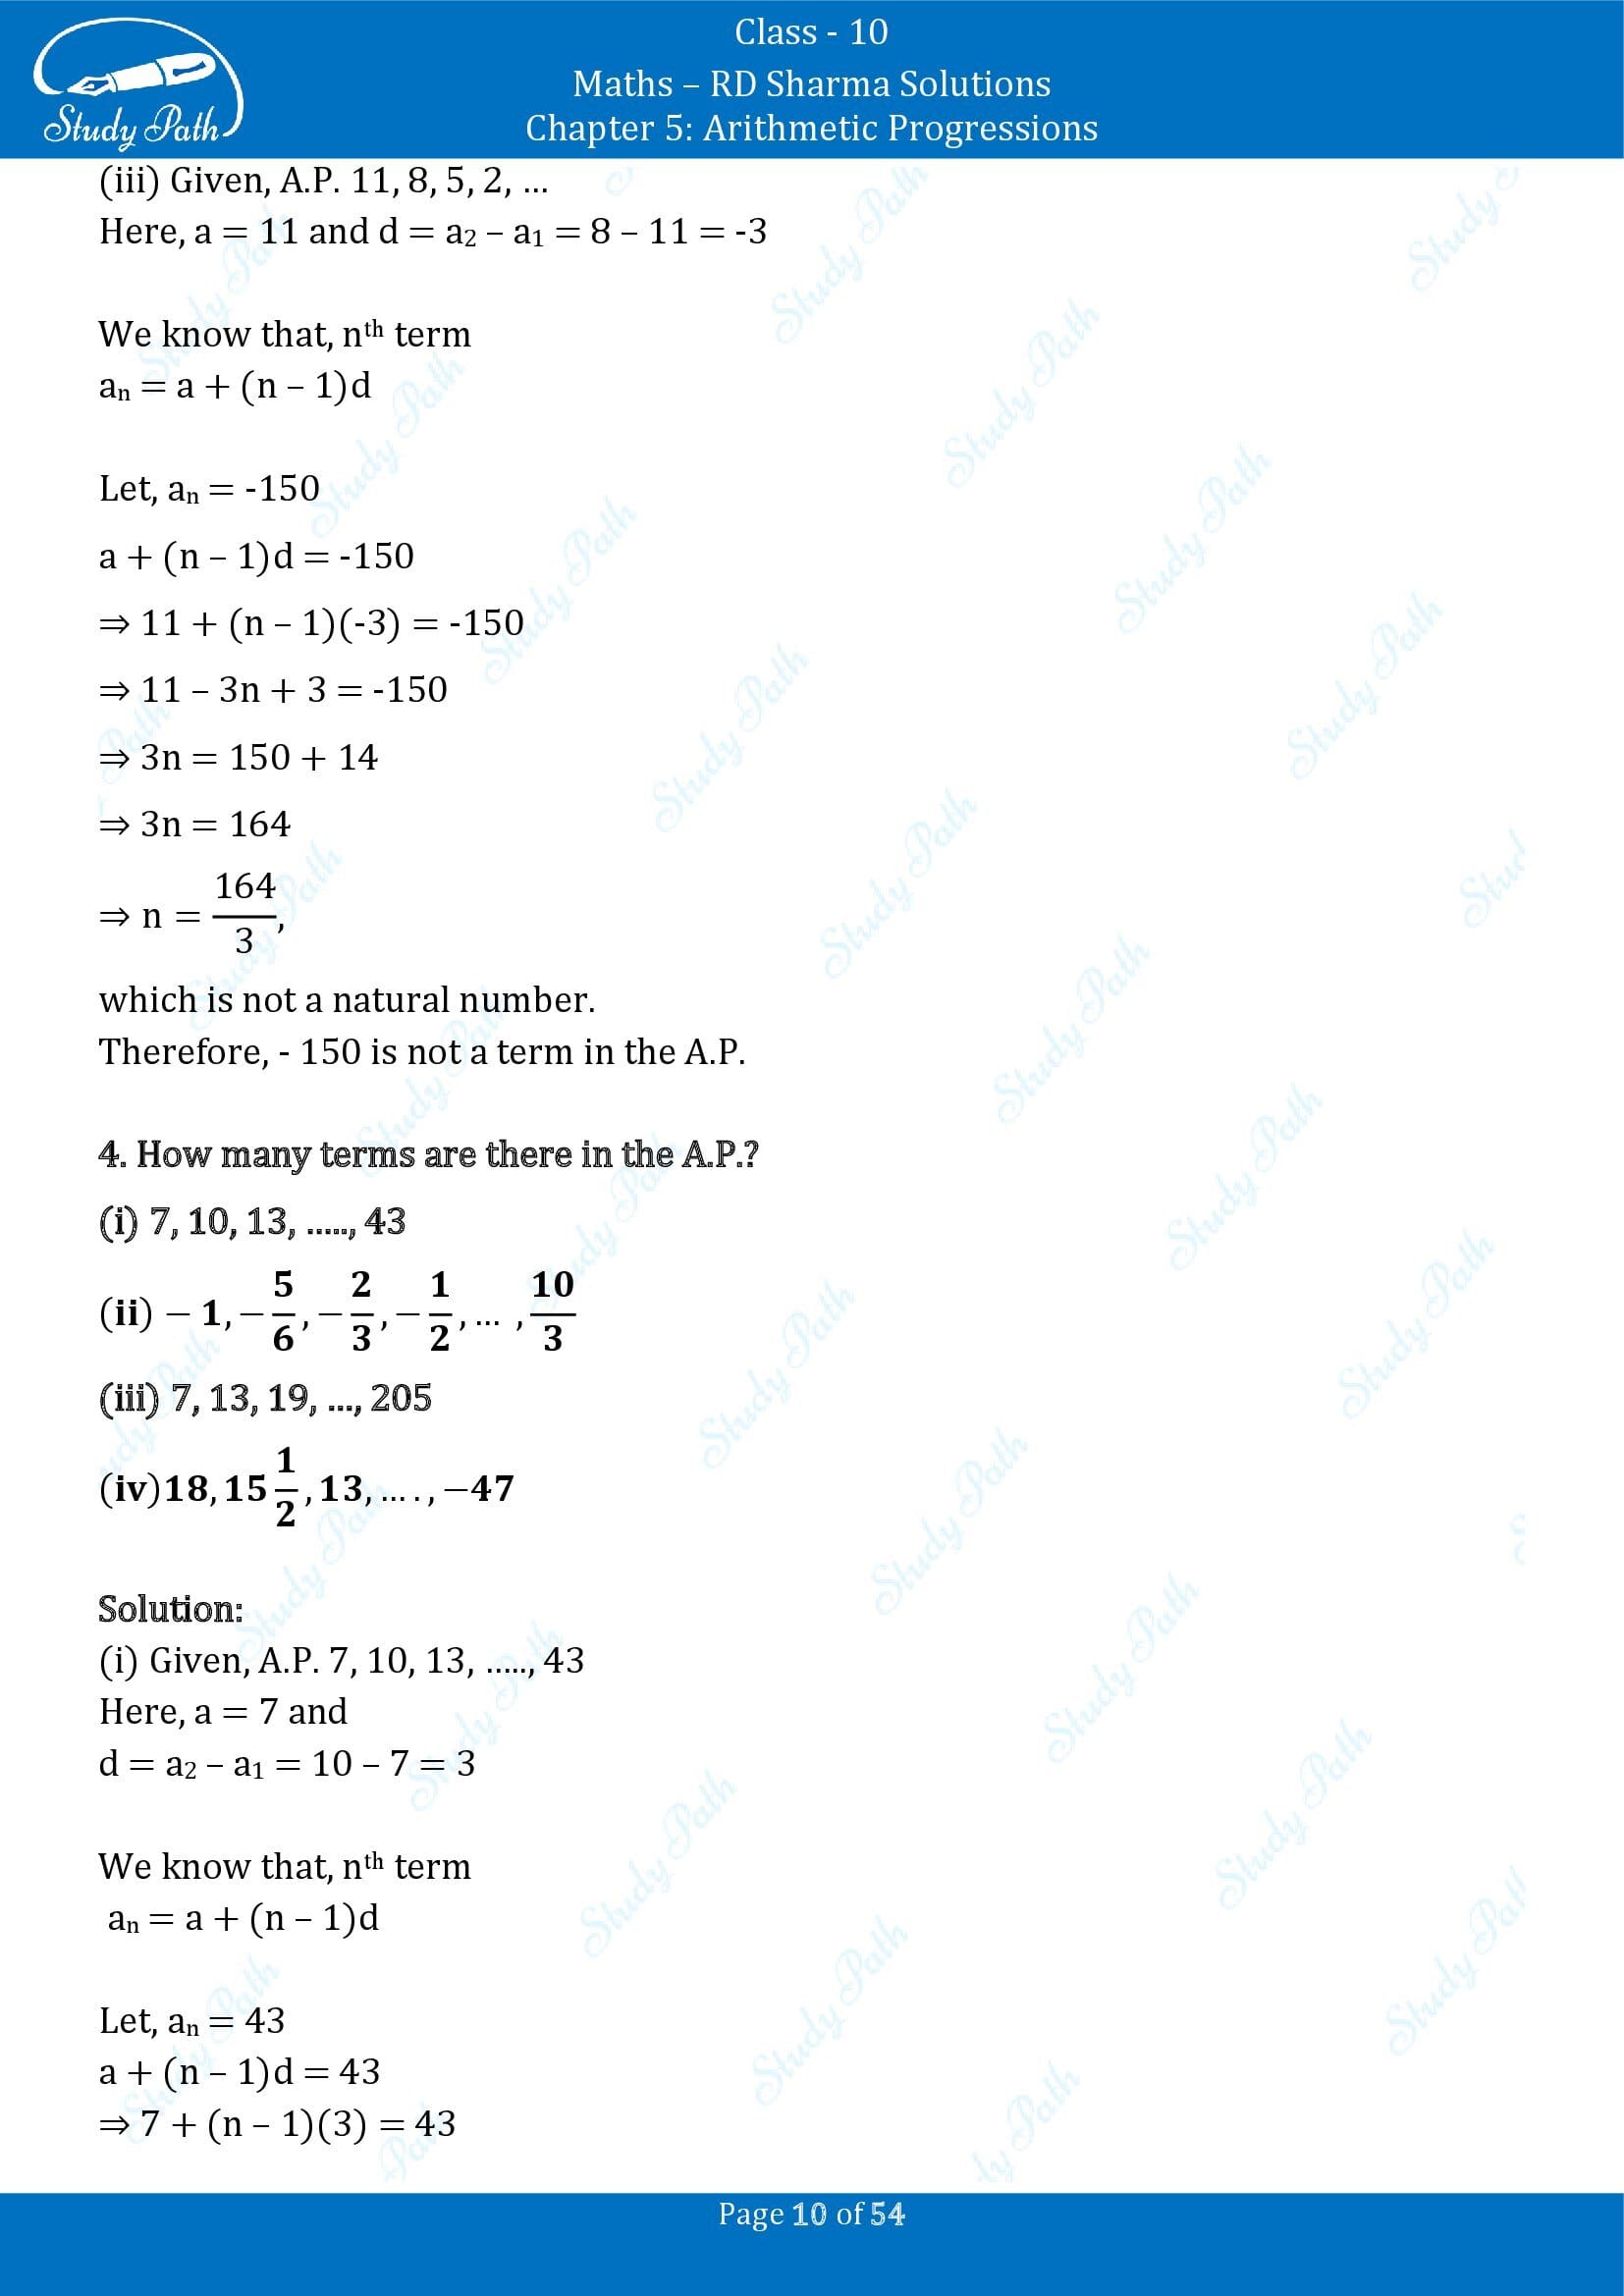 RD Sharma Solutions Class 10 Chapter 5 Arithmetic Progressions Exercise 5.4 00010